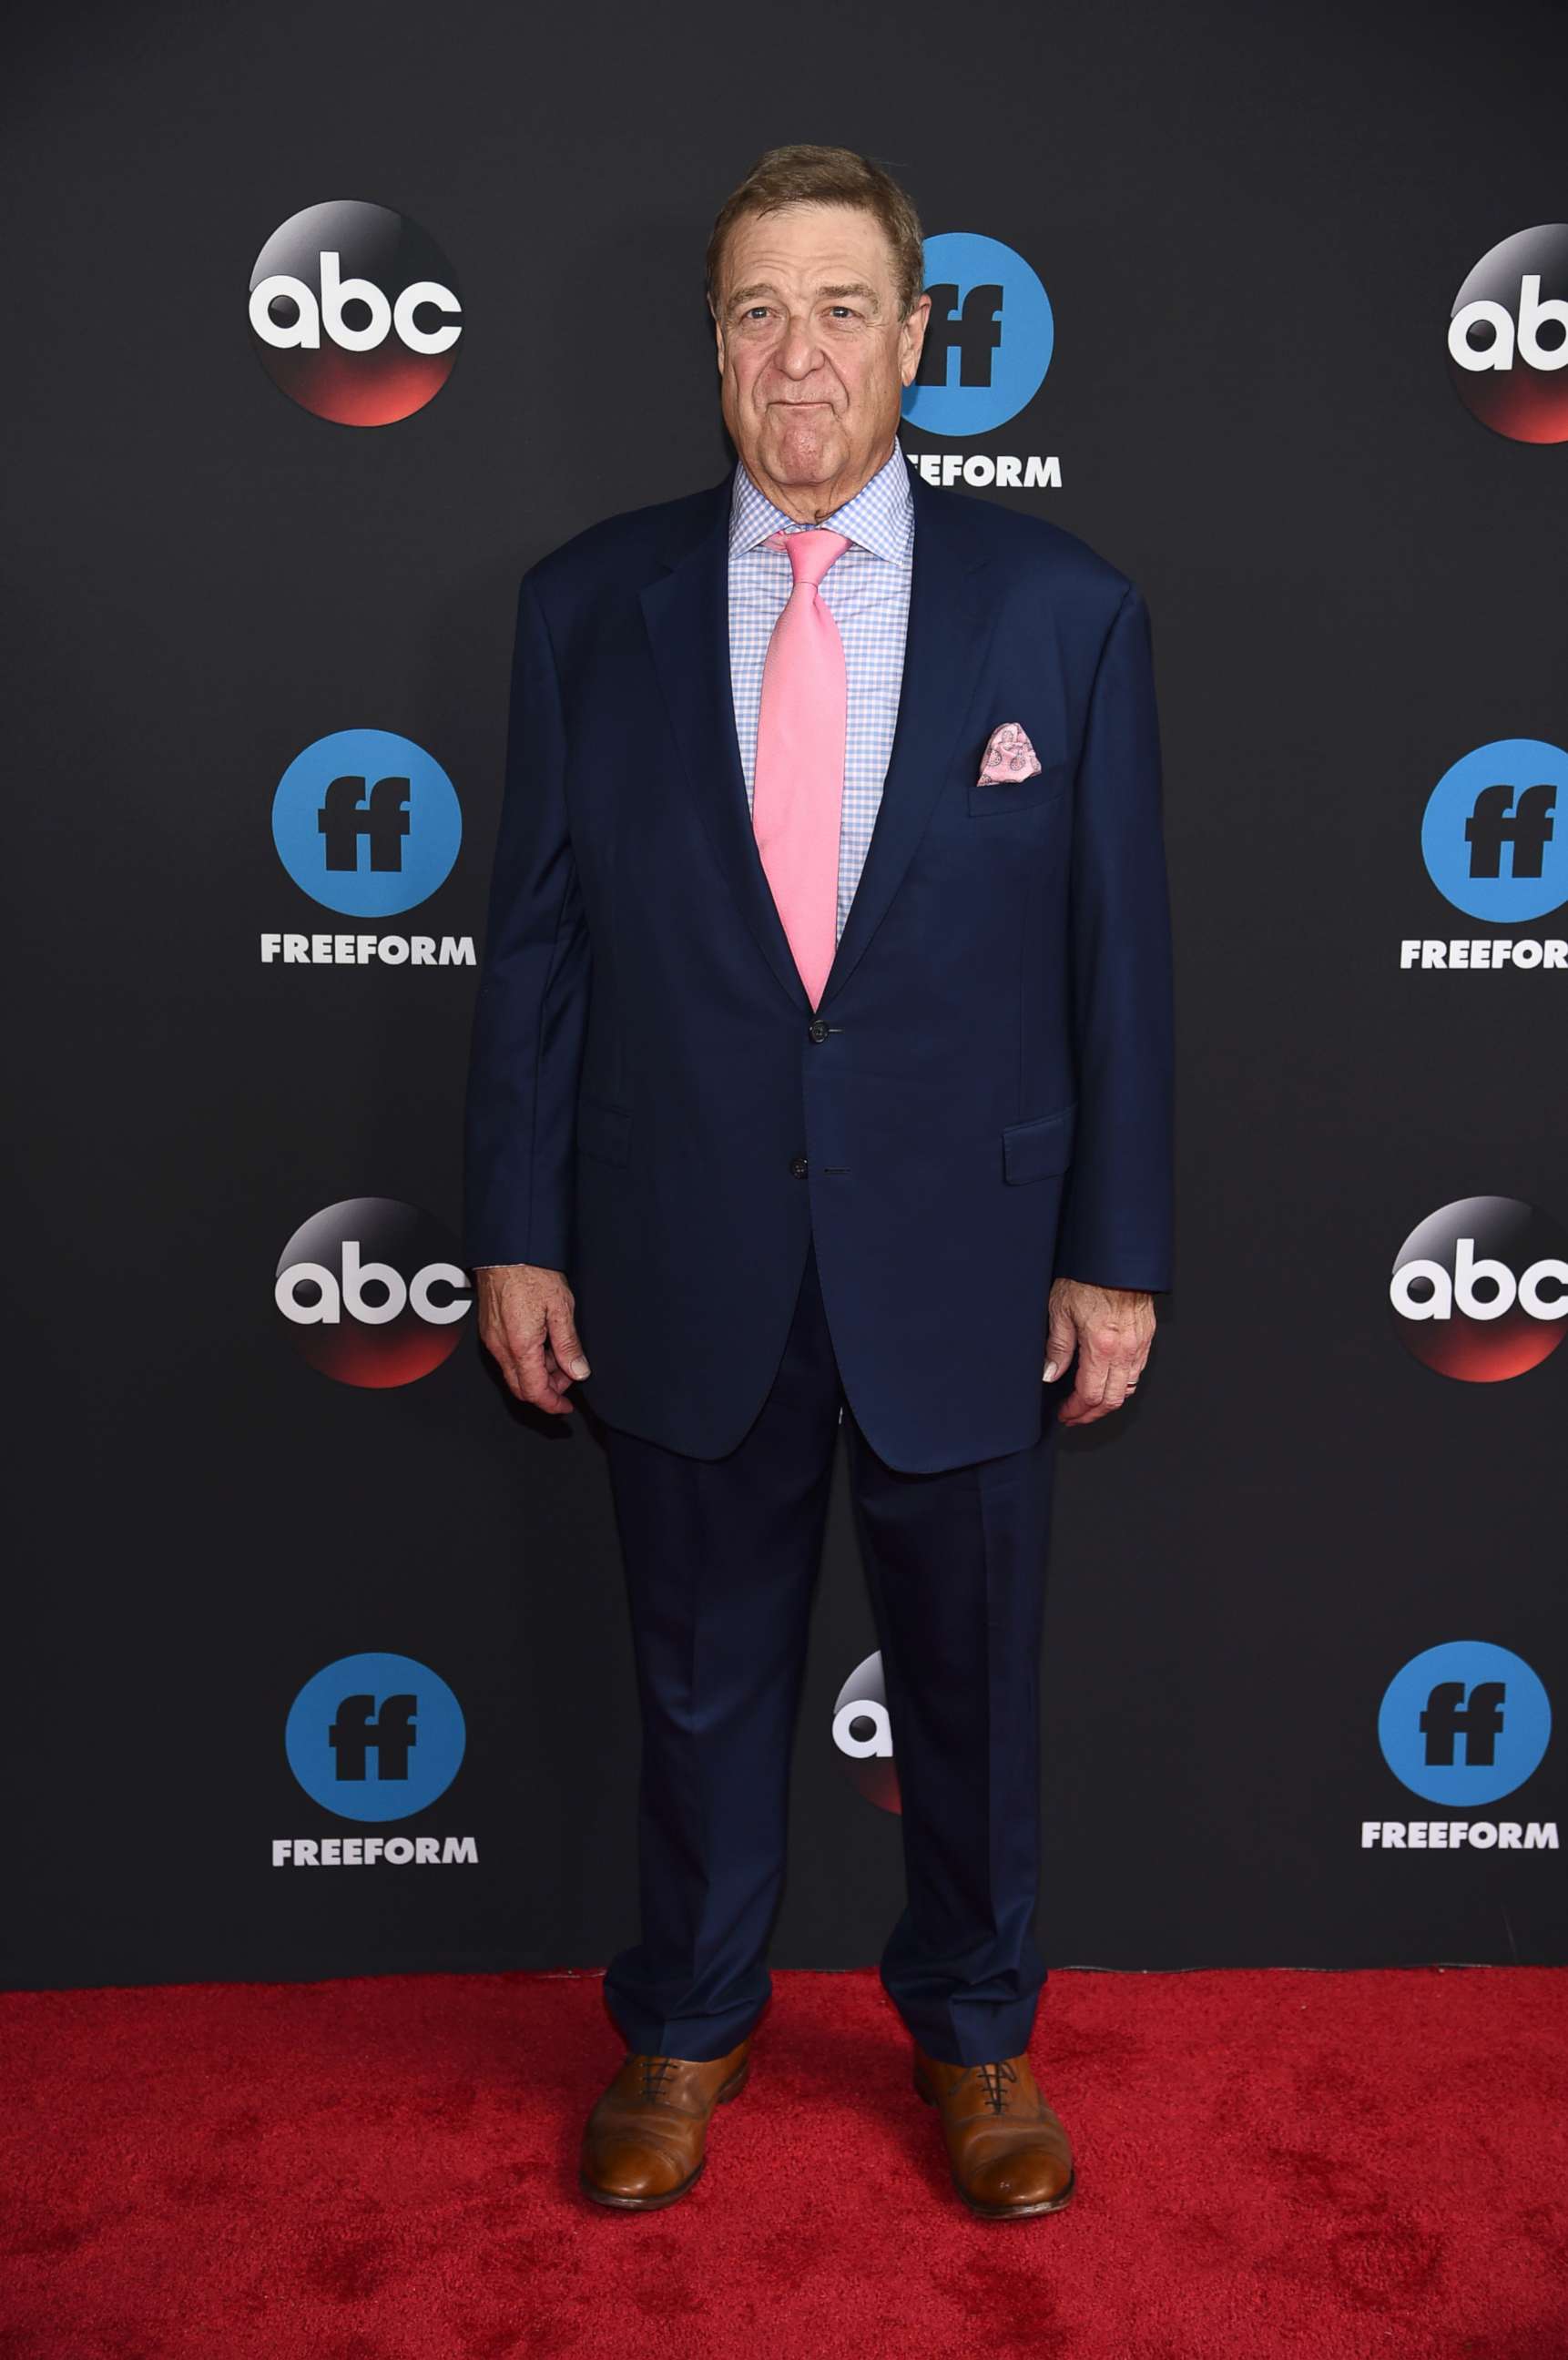 PHOTO: John Goodman attends the 2018 Disney, ABC, Freeform Upfront at Tavern On The Green, May 15, 2018, in New York City.